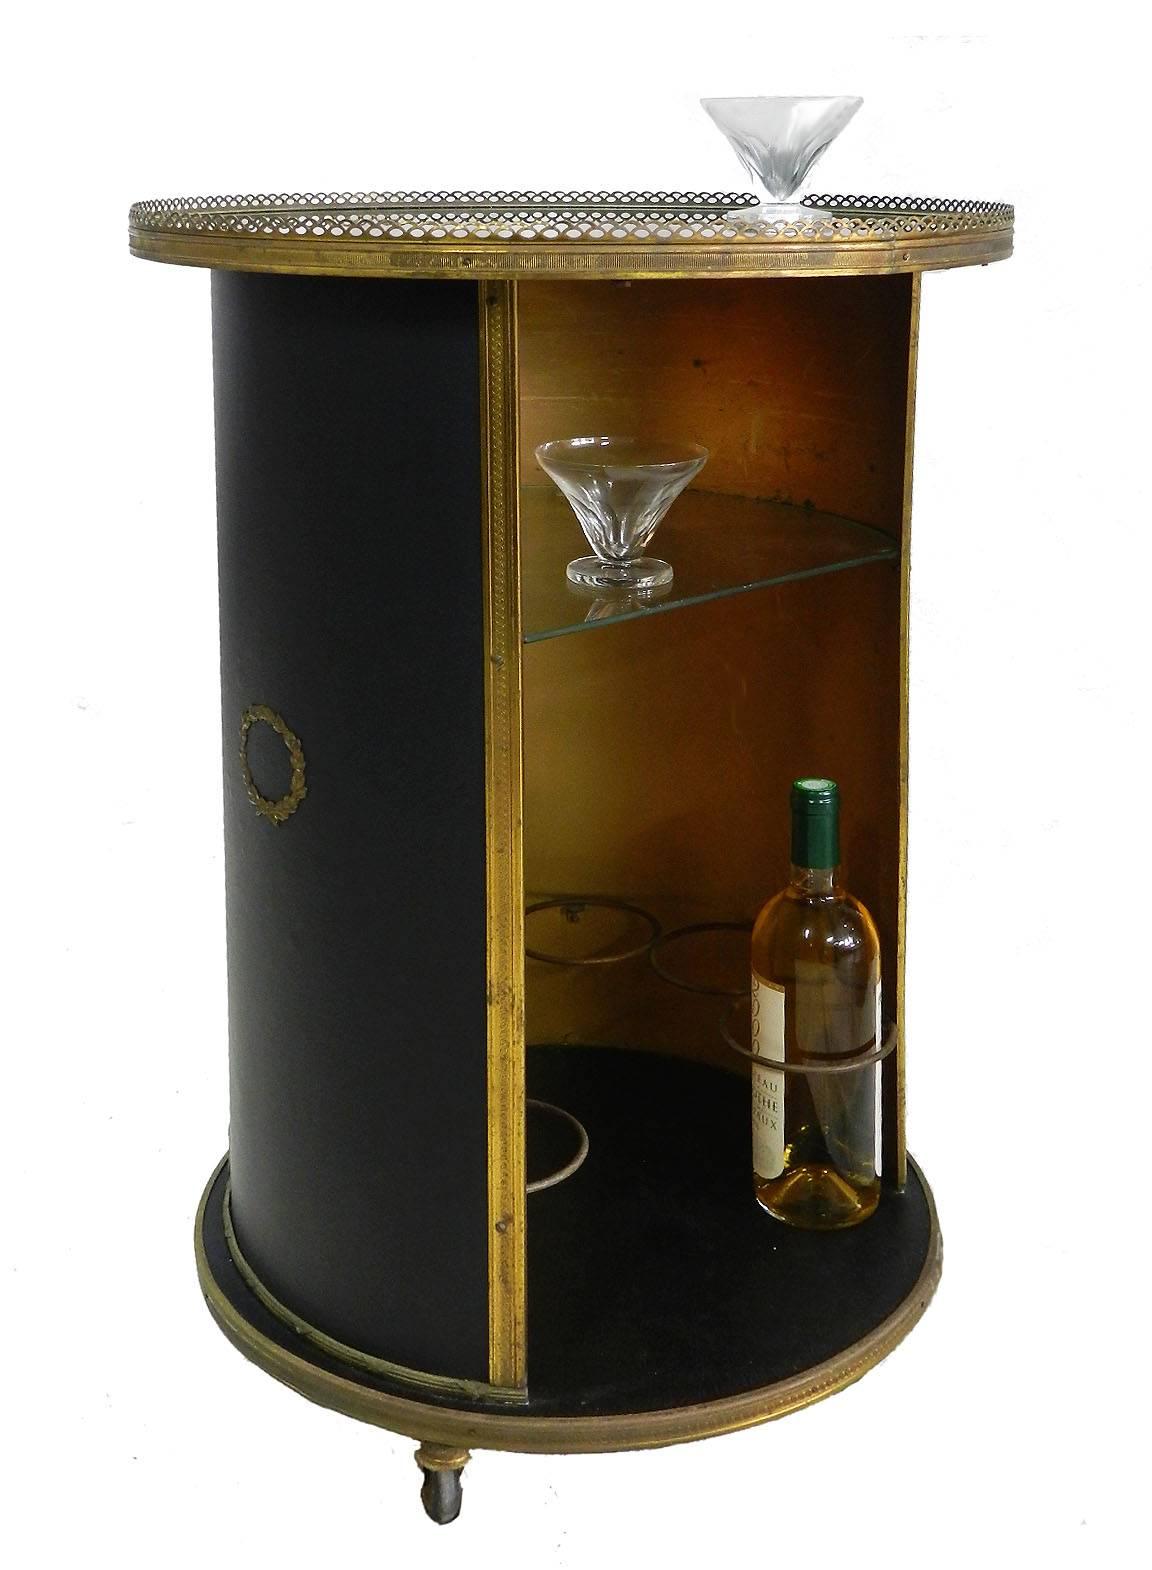 Midcentury bar cart Hollywood Regency cocktail trolley in the manner of Jansen
Rare find very unusual
Circular top round with brass gallery and high shine inset top
Covered in thin black faux leather with ormolu wreath mounts
Black and gold.
In very